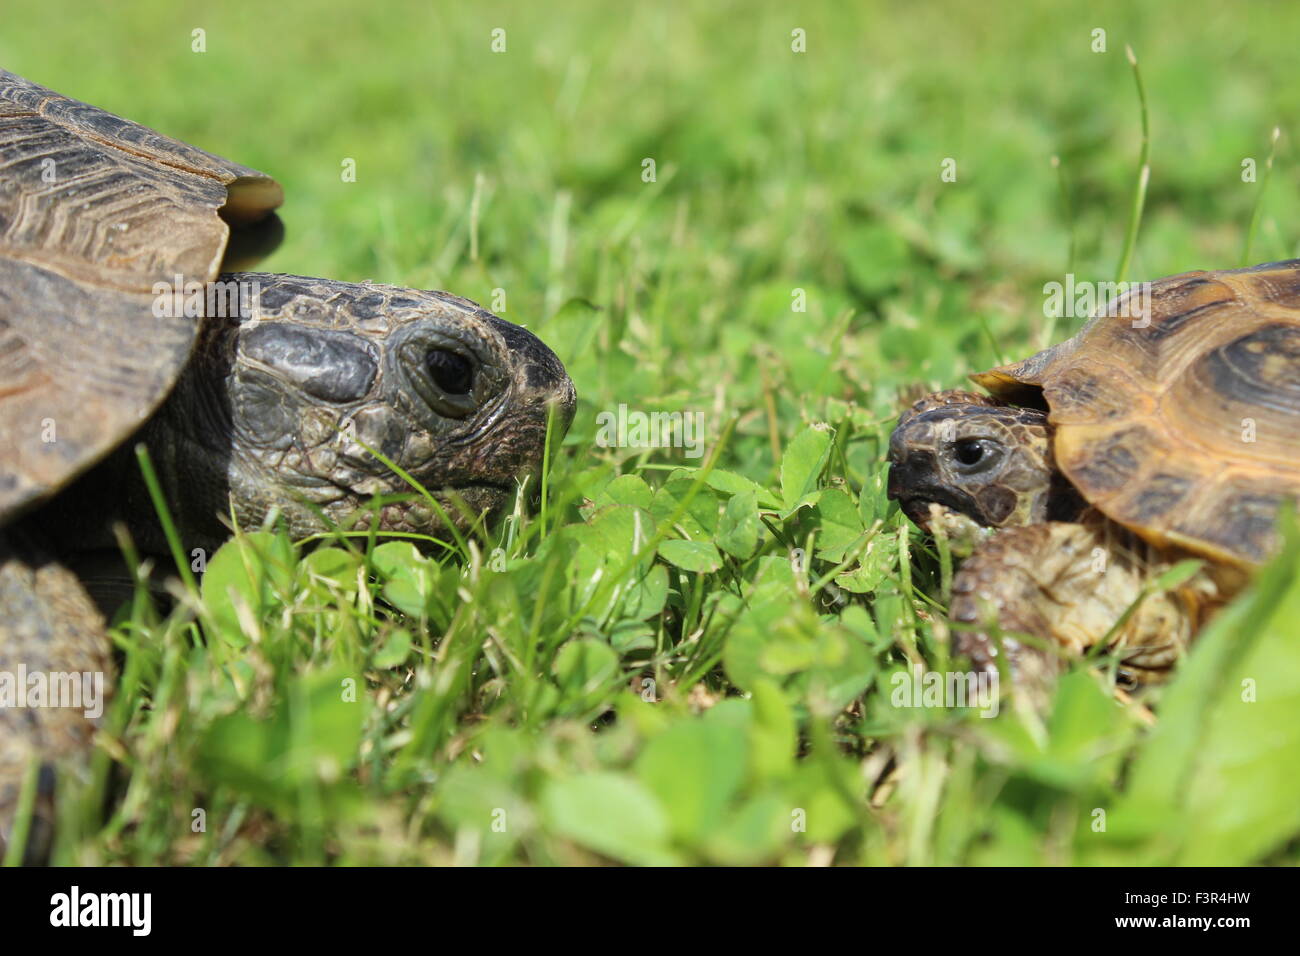 Tortoises facing each other Stock Photo